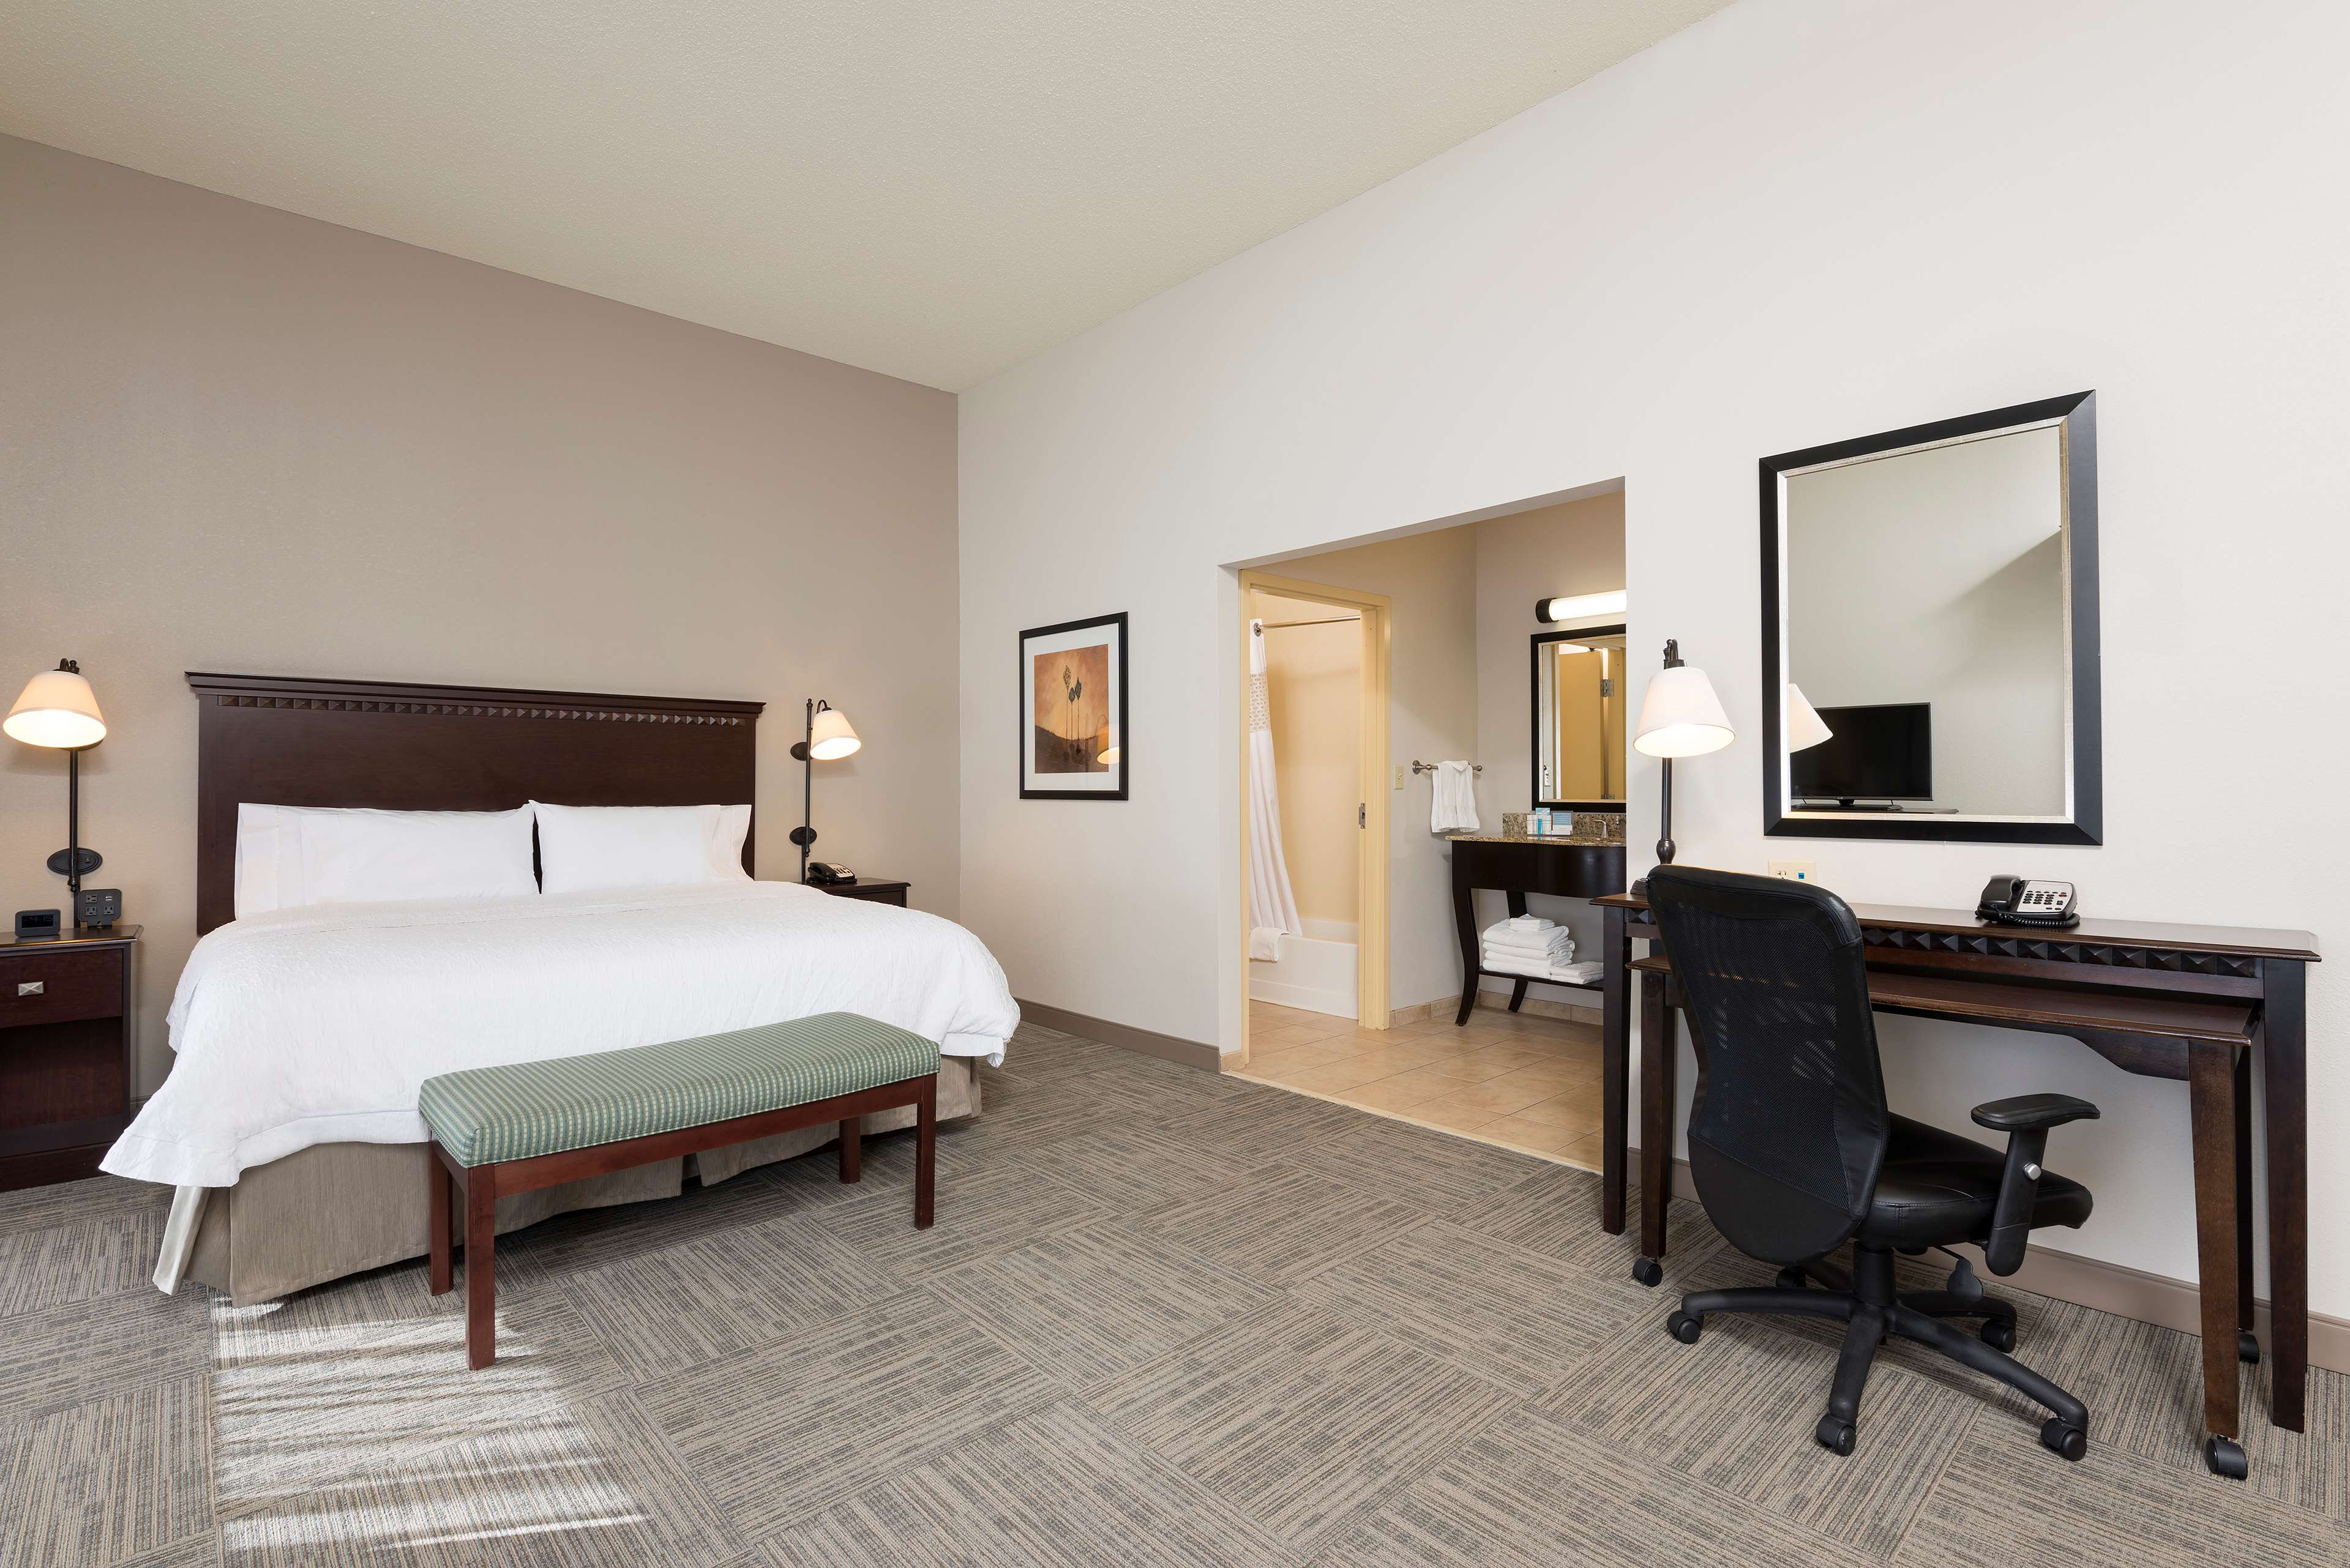 Hampton Inn & Suites Hartford-Manchester Coupons near me in Manchester, CT 06042